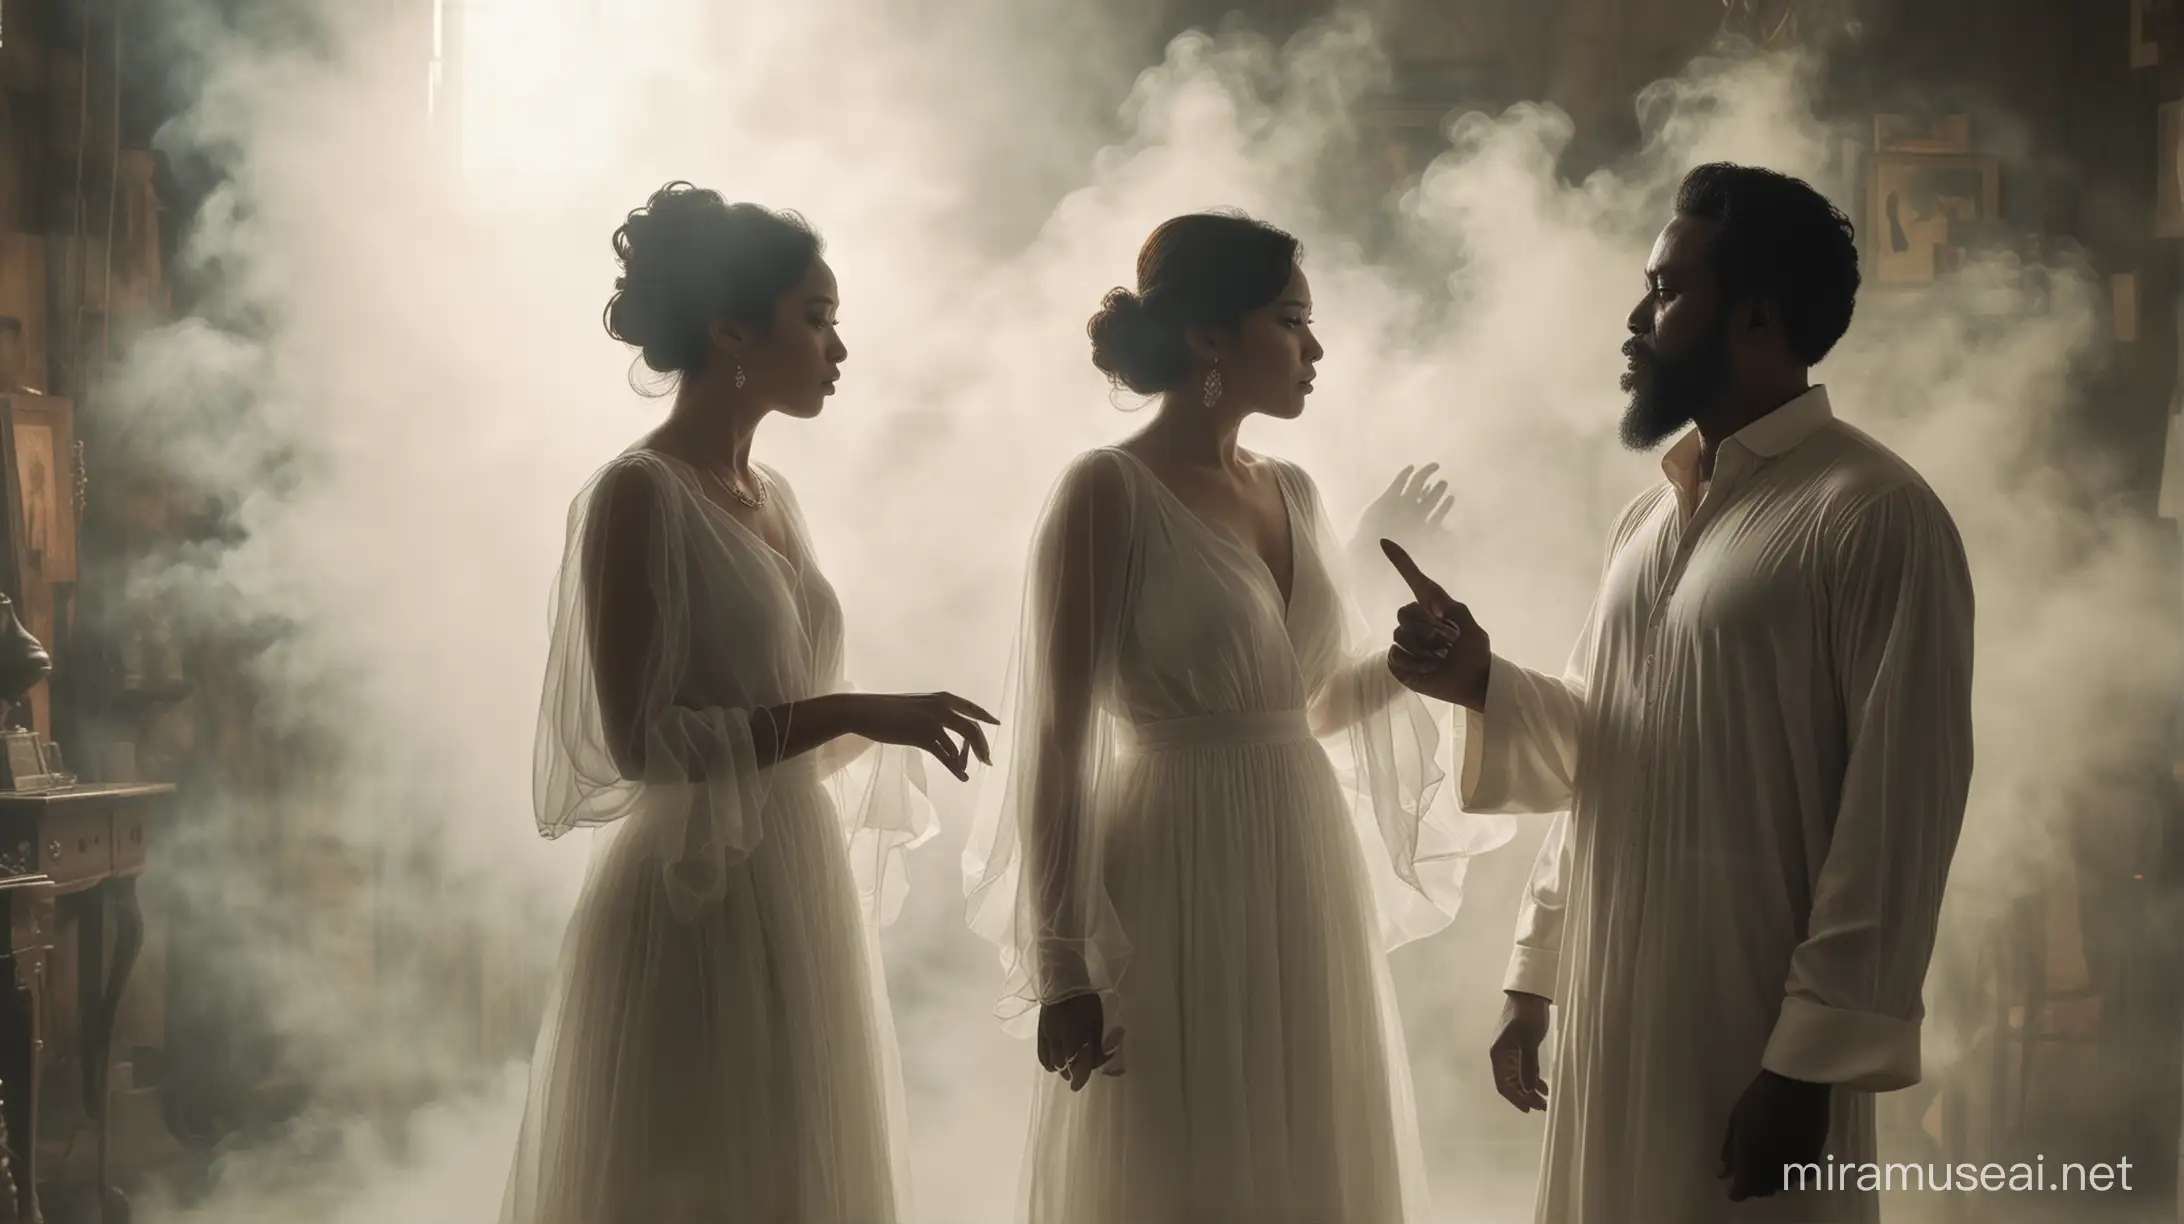 Hazy, dream scene of a middle-aged Filipino woman with shoulder-length updo hairstyle wearing white ghostly dress, pointing to a bearded African-American man with vintage 70s style clothing, their faces are obscured by shadows, they are surrounded by smoke like a vision in a dream, mysterious aesthetic, paranormal